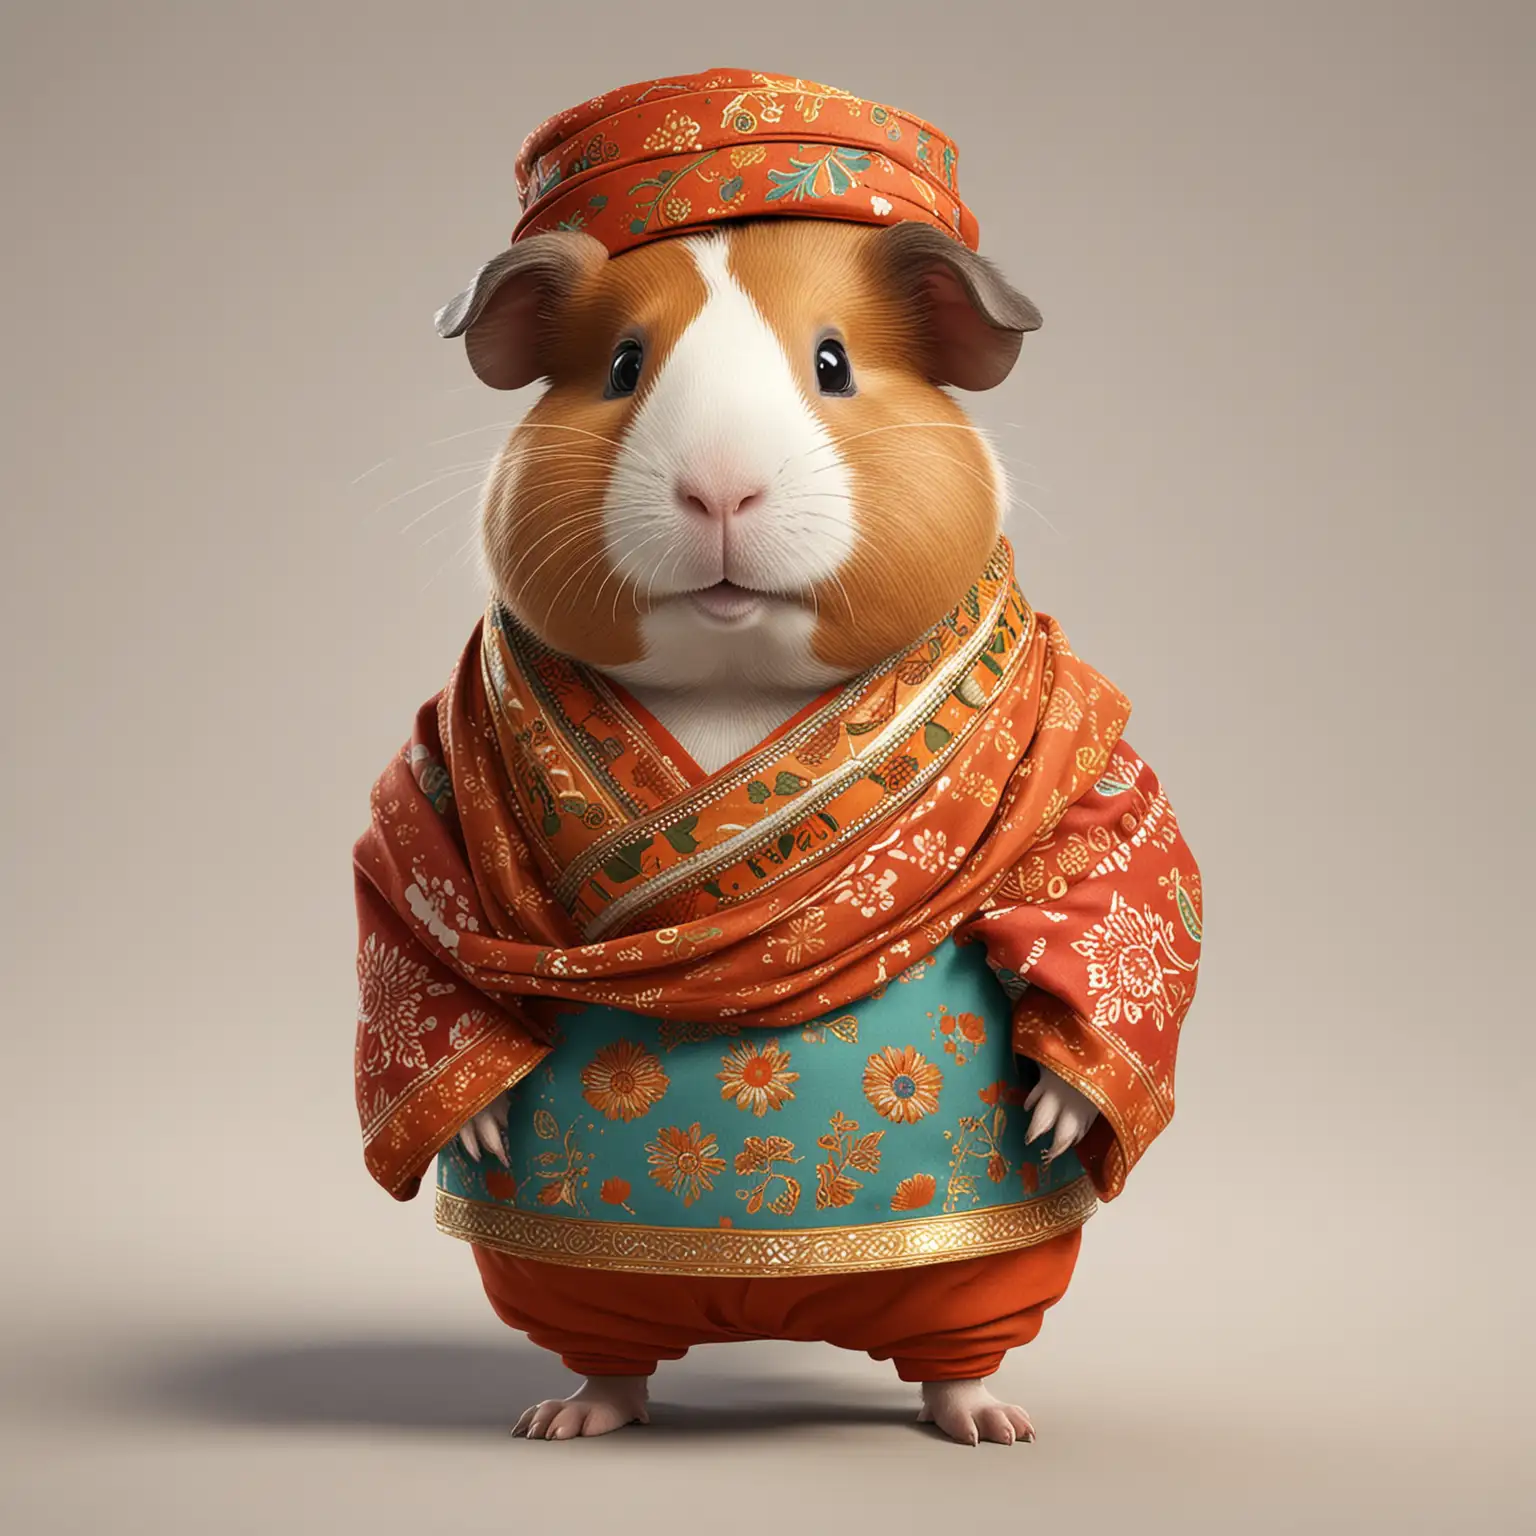 Adorable Cartoon Guinea Pig Wearing Traditional Indian Attire